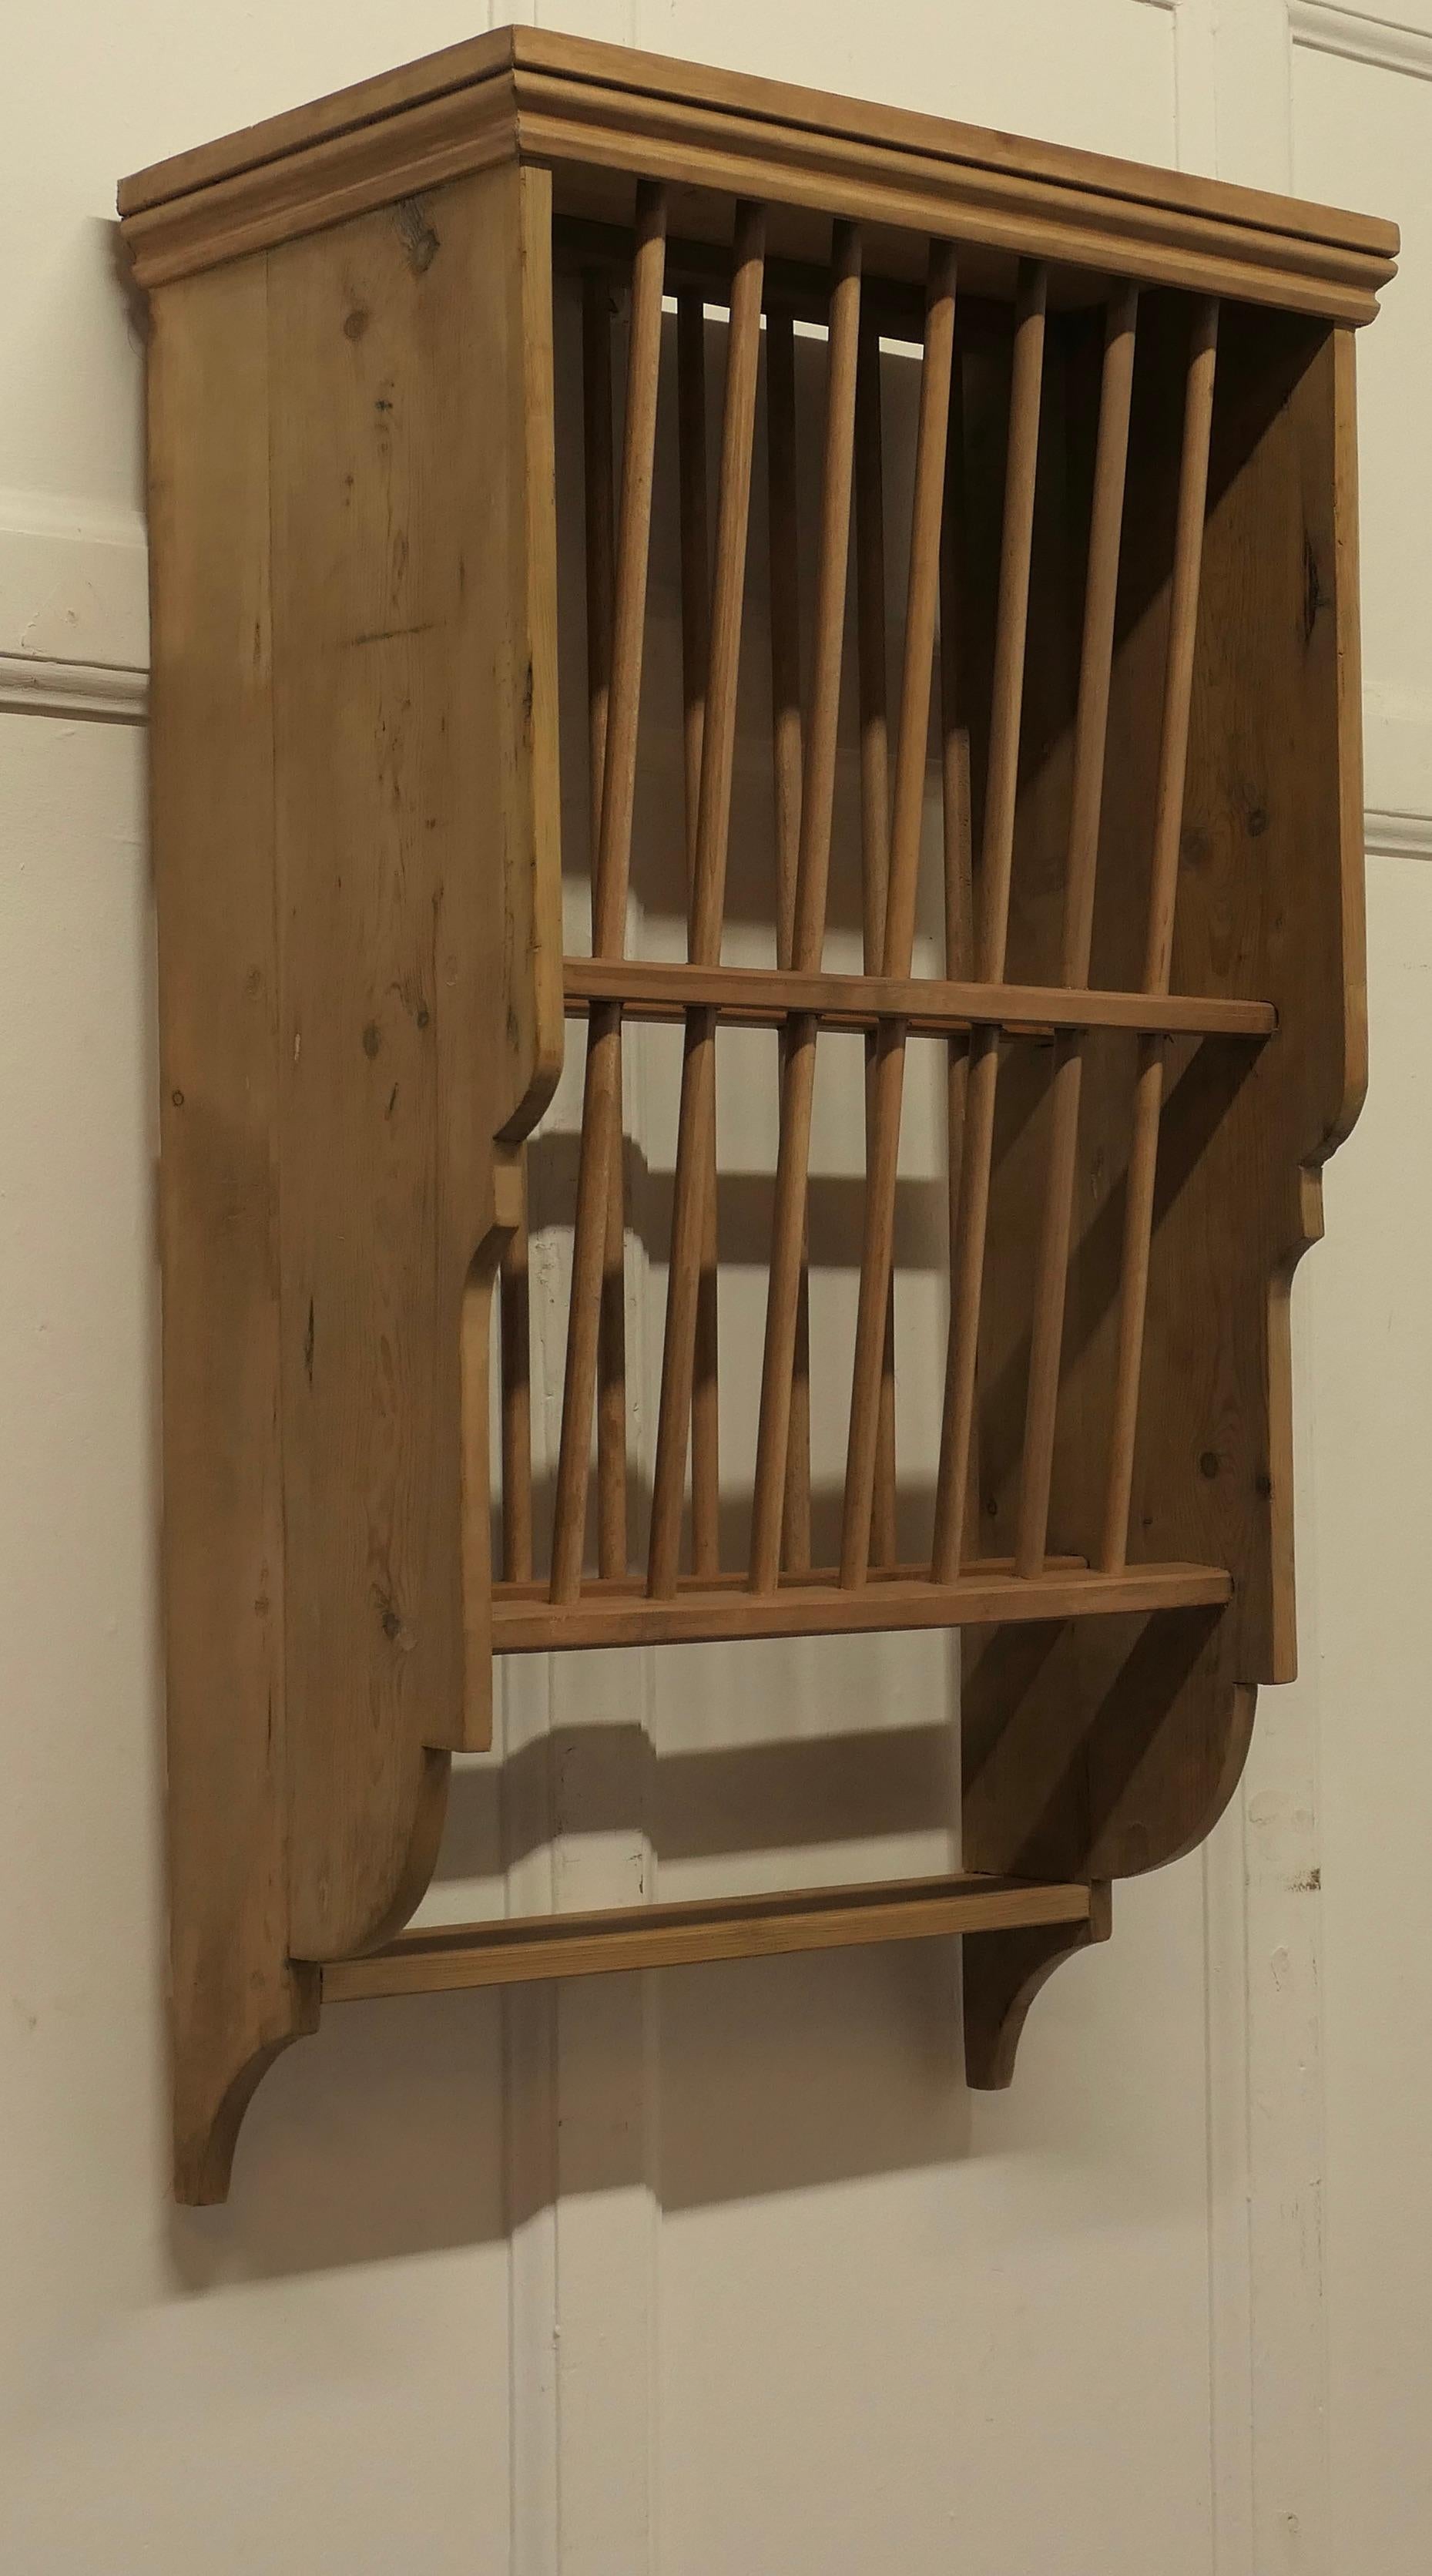 Small Wall Hanging Pine Plate Rack


This useful piece hangs on the wall and drains and stores plates until required
It has a pine frame and wooden dowels with a waterfall shape, allowing 2 rows of plates to be stored at any one time, below there is